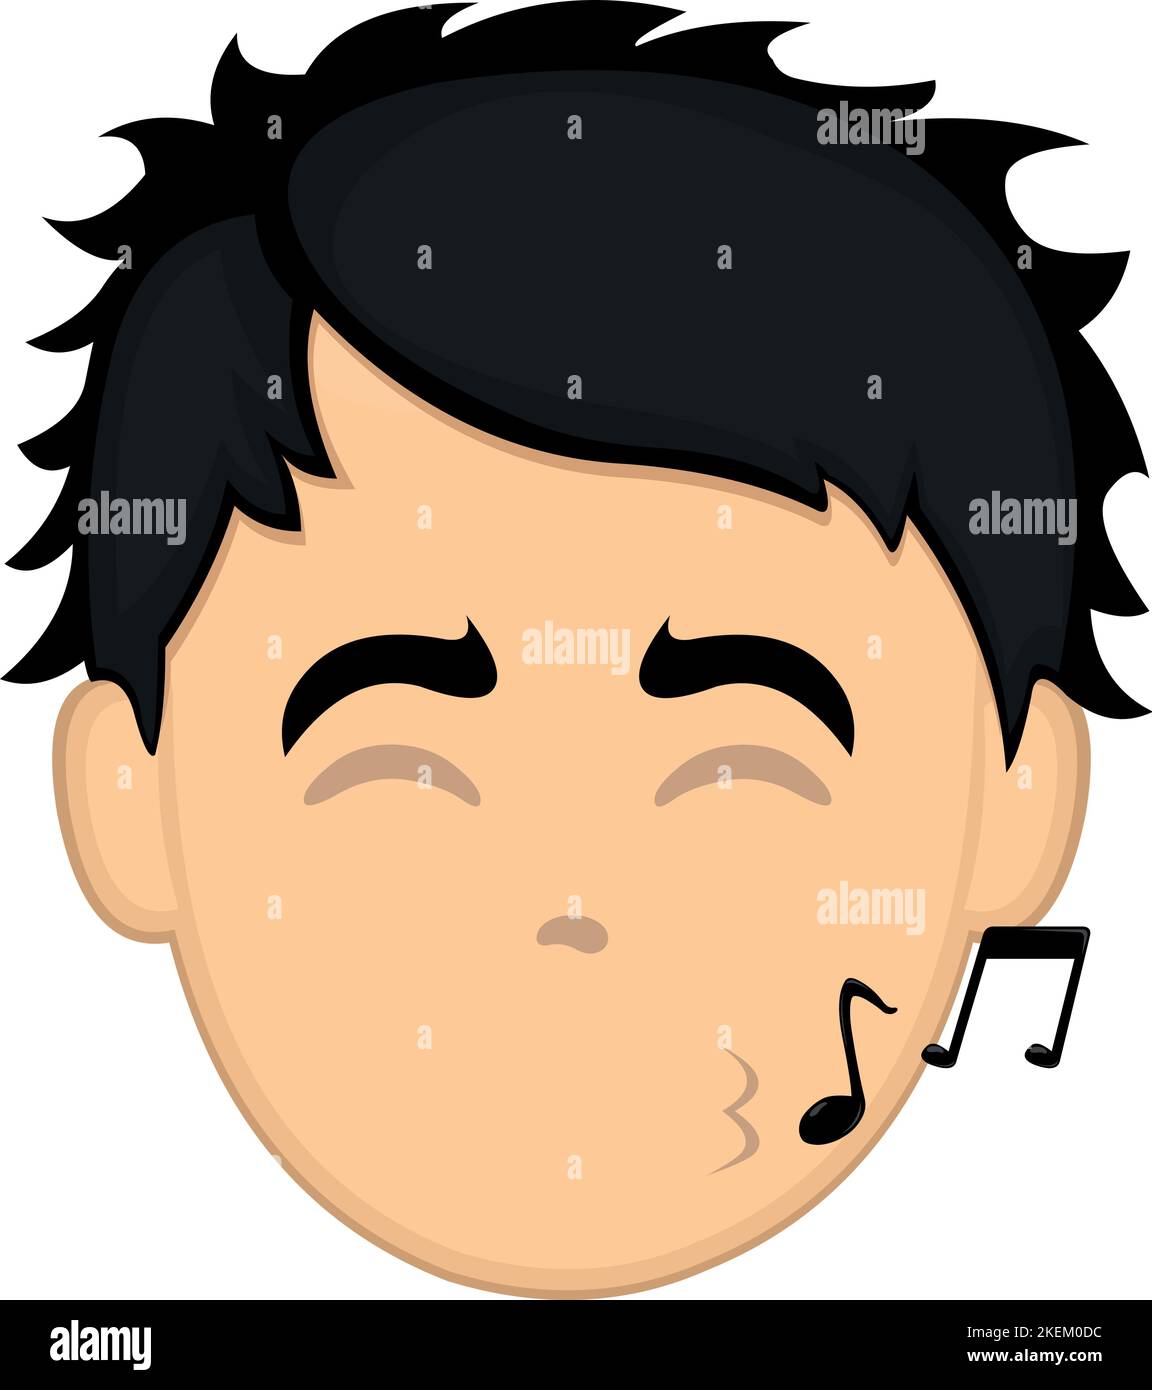 vector illustration of a cartoon man face whistling with music notes coming out of his lips Stock Vector